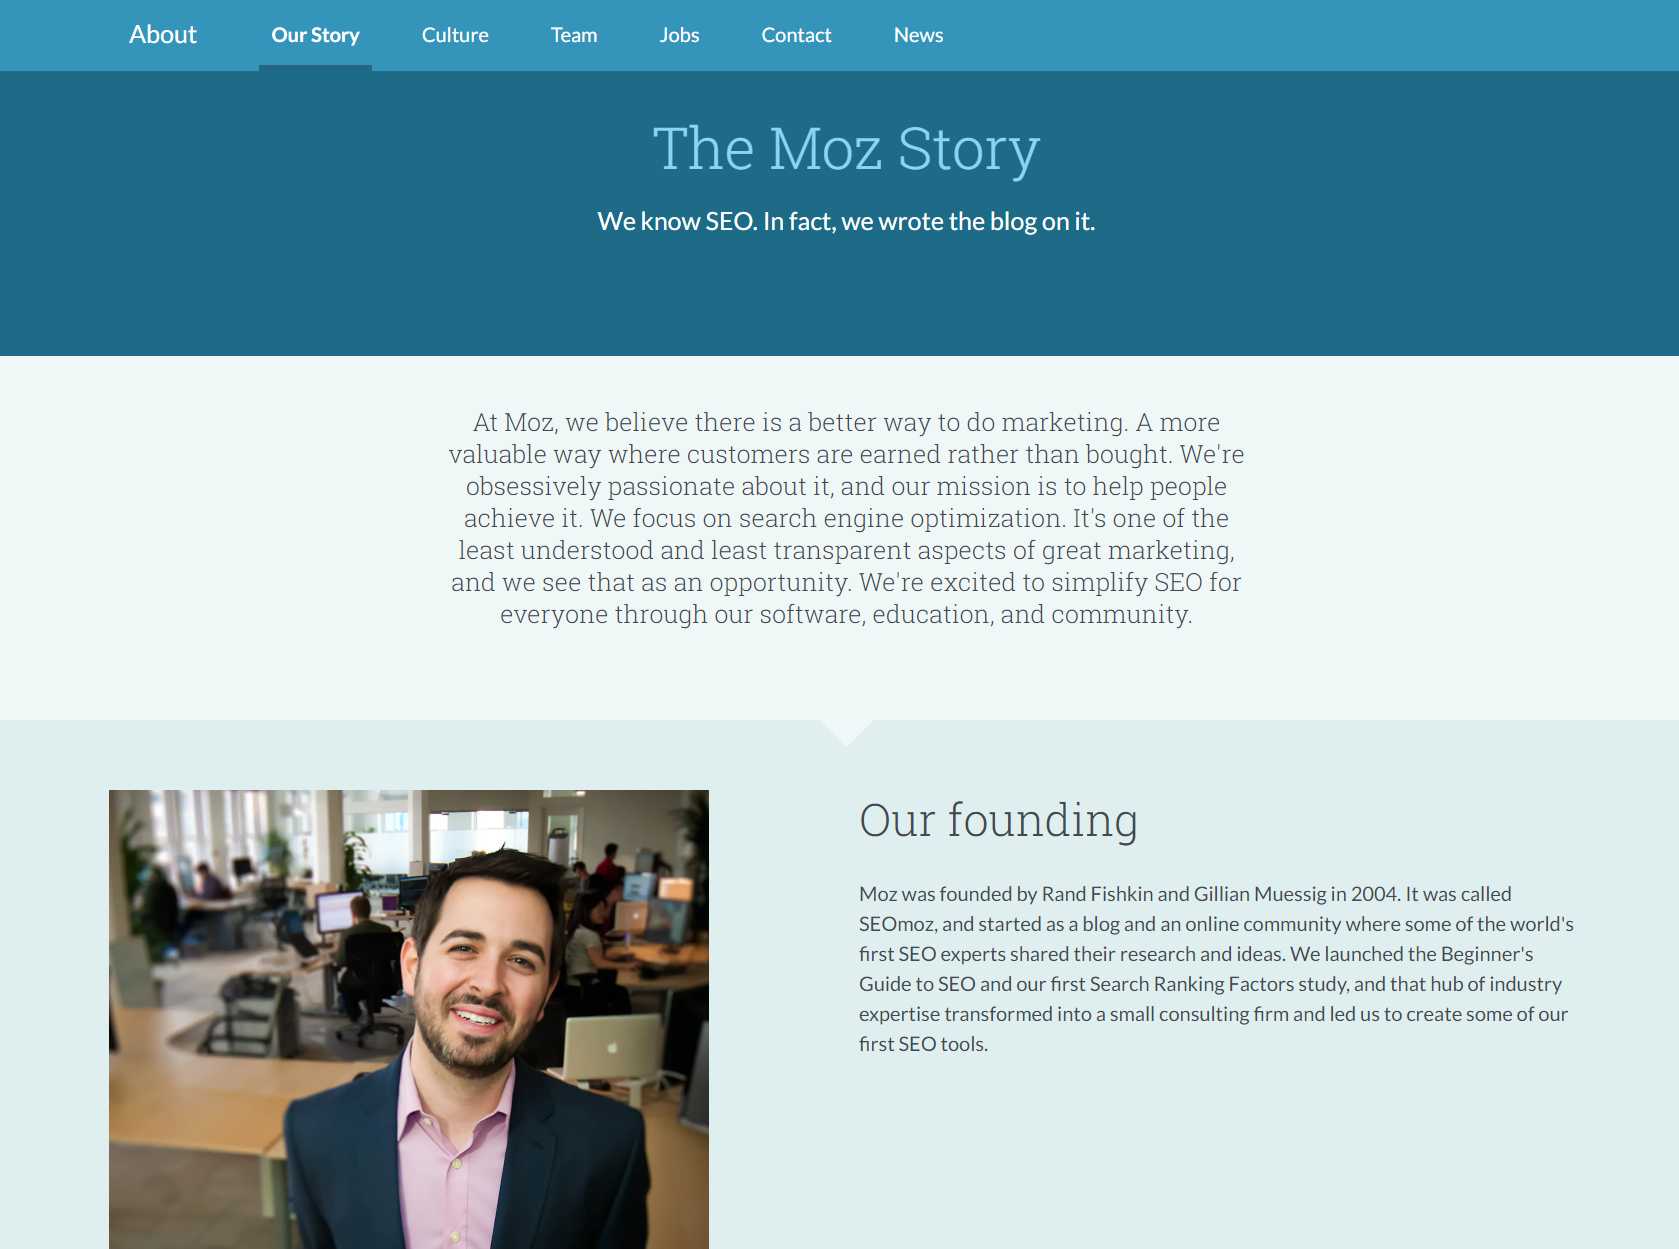 The story of Moz on its About Us page